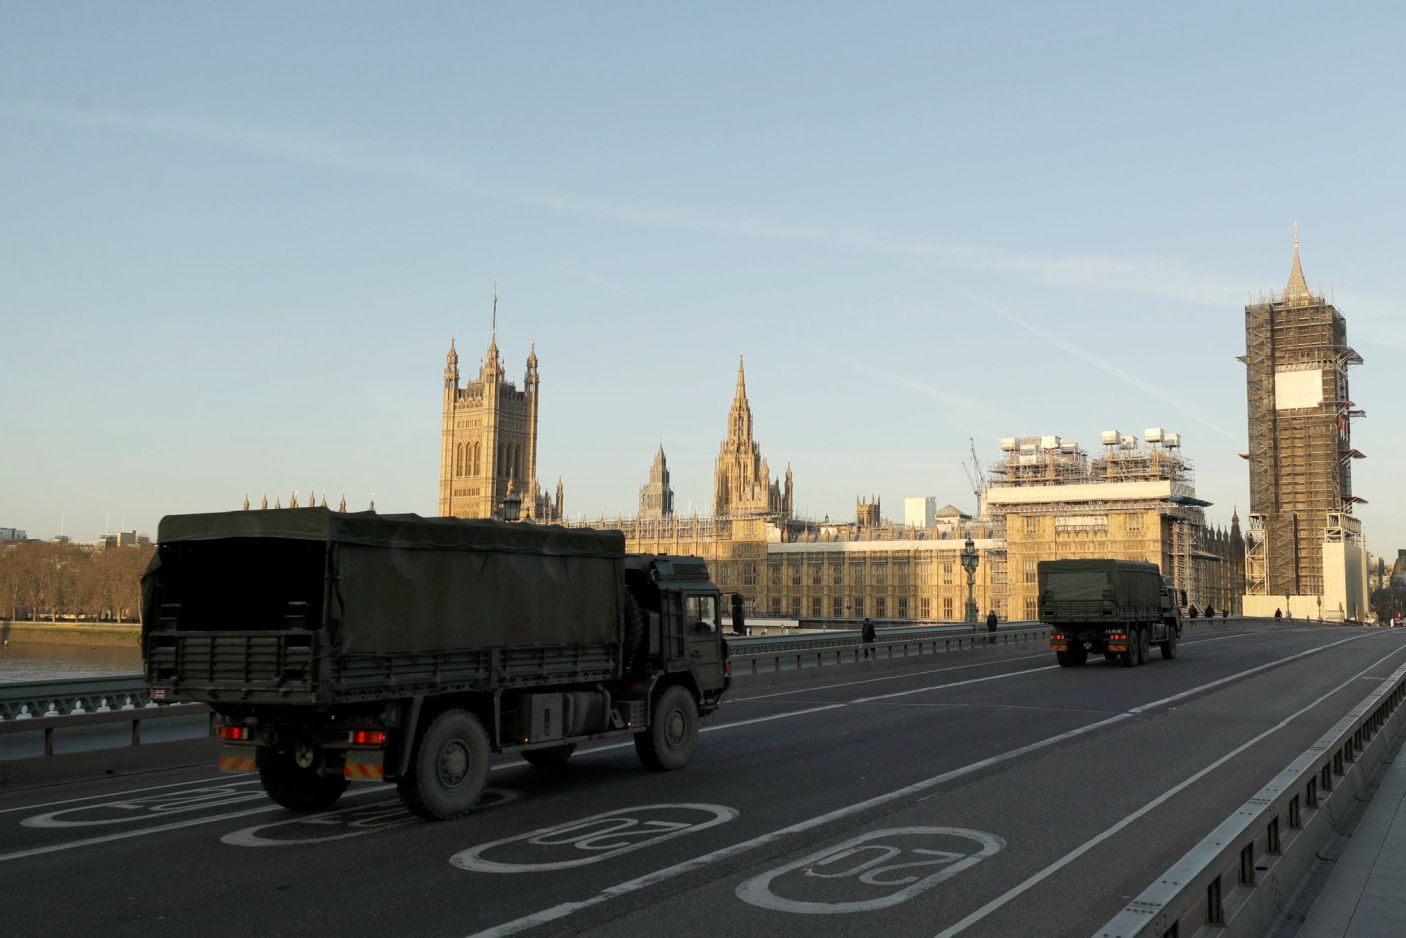 British Army trucks cross Westminster Bridge towards the Houses of Parliament in London, March 24, 2020.